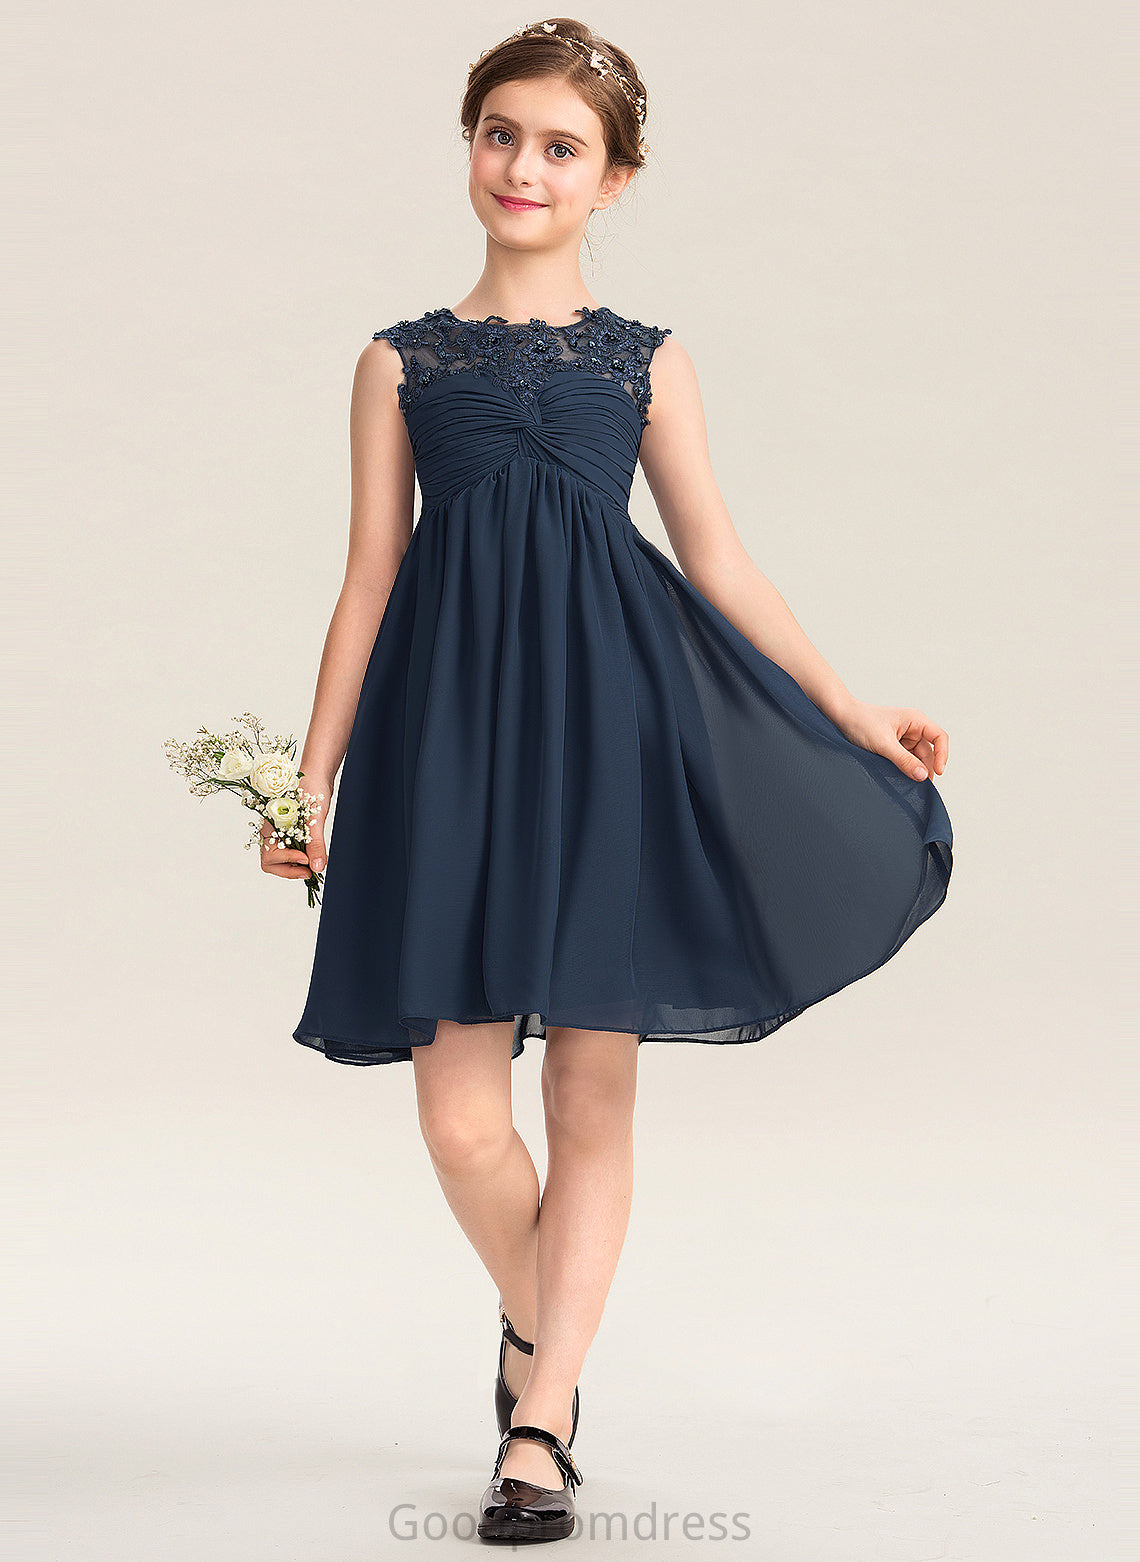 Neck Beading With Knee-Length Sequins Chiffon Dania Ruffle Scoop Junior Bridesmaid Dresses Lace Empire